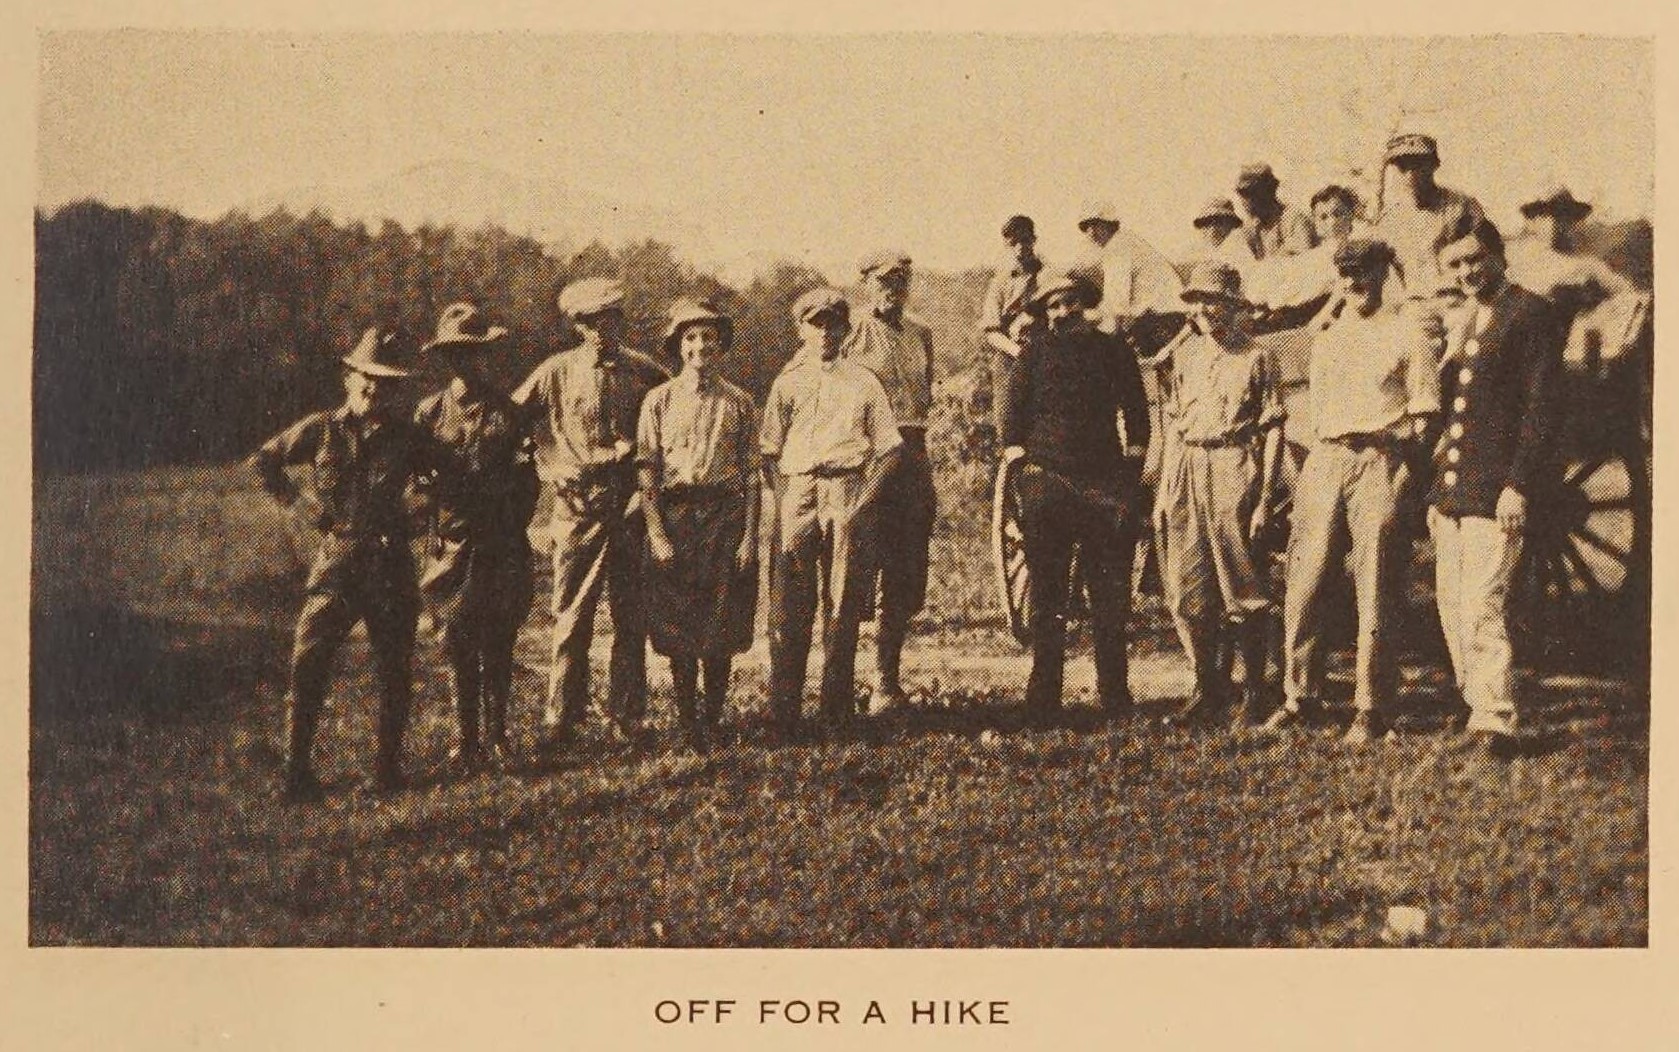 A group of boys in hats standing together before going on a hike. The caption under the photo reads: off for a hike.